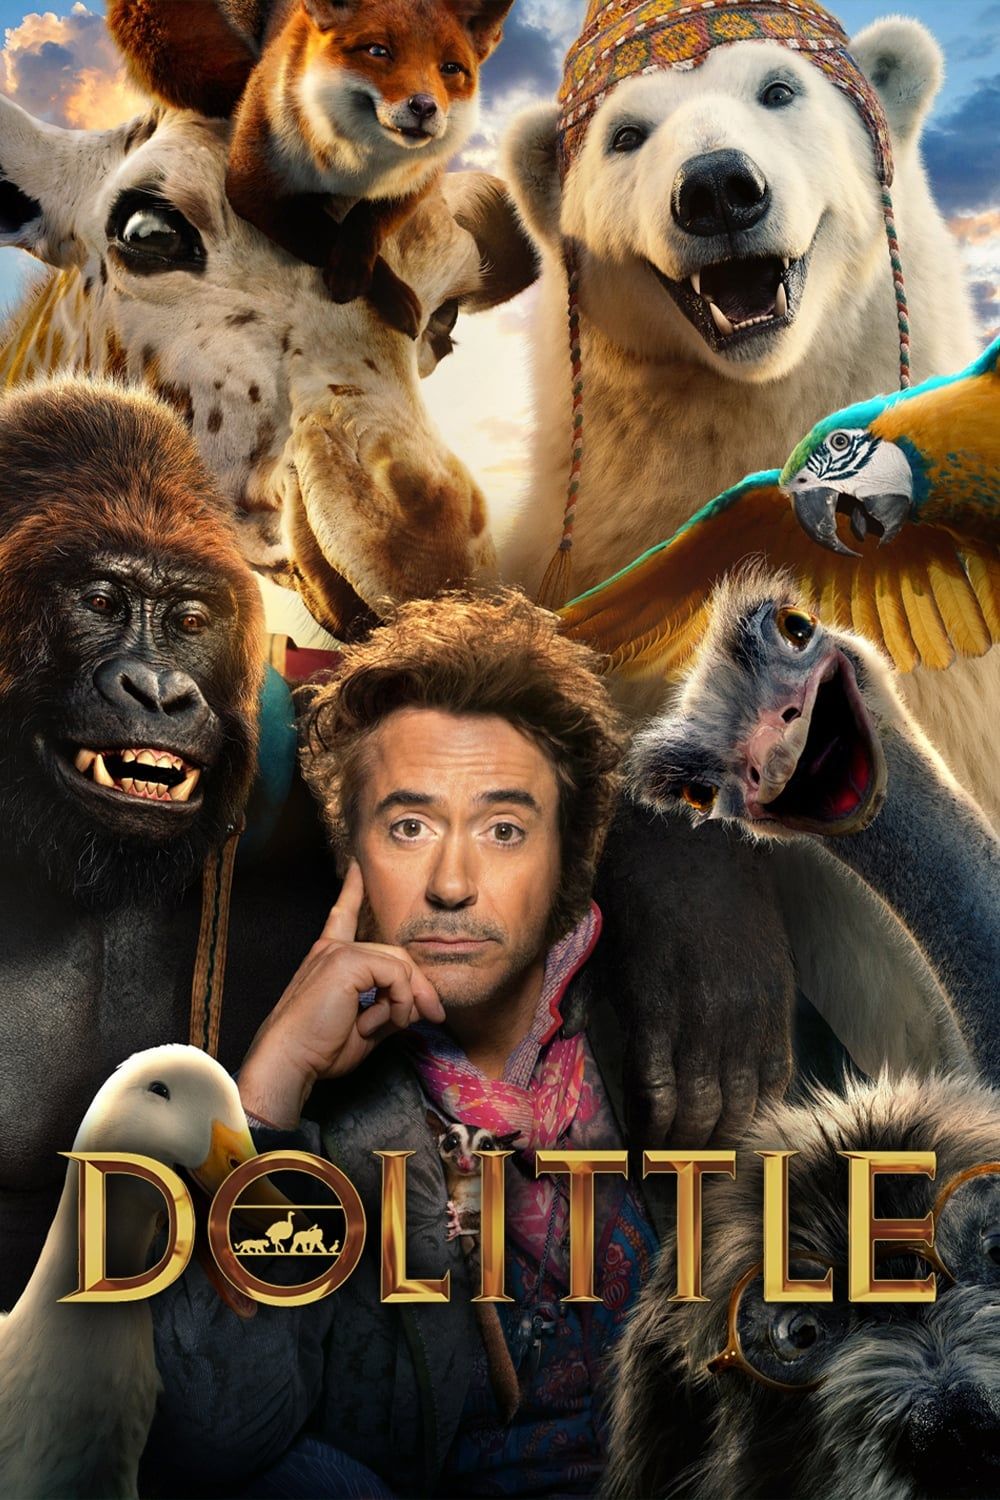 RDJ’s New Show With 89% On Rotten Tomatoes Makes His 1M Box Office Bomb Look Even Worse